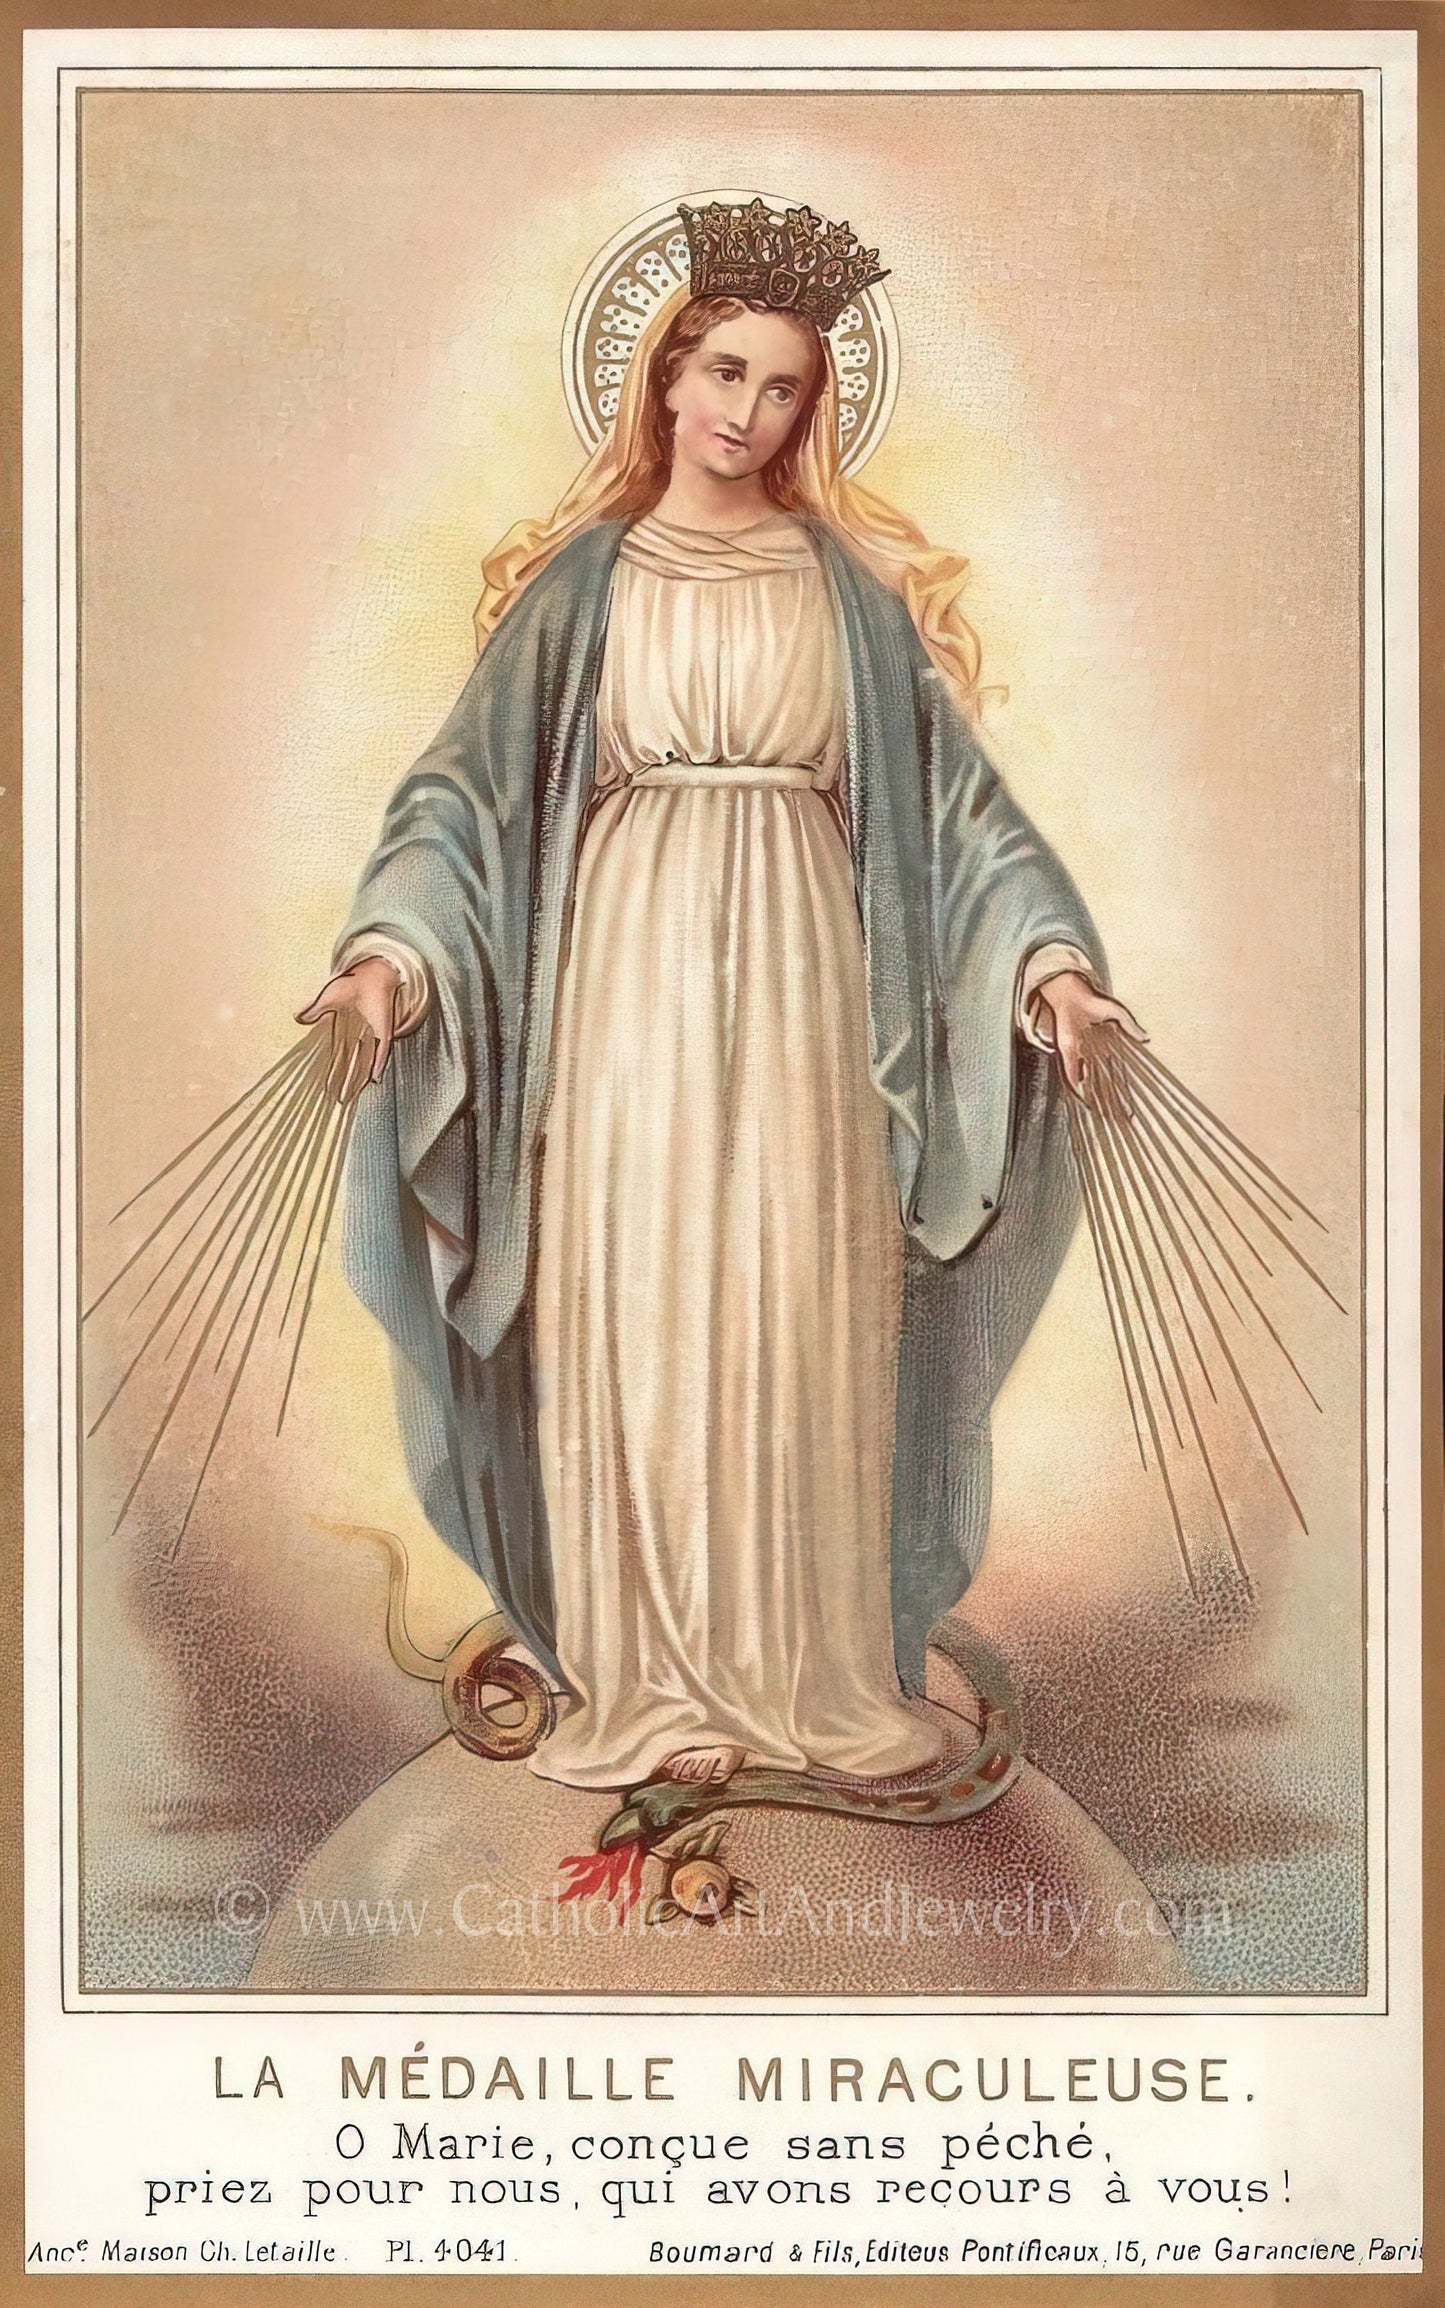 Miraculous Medal – based on a Vintage Holy Card – Catholic Art Print – Archival Quality